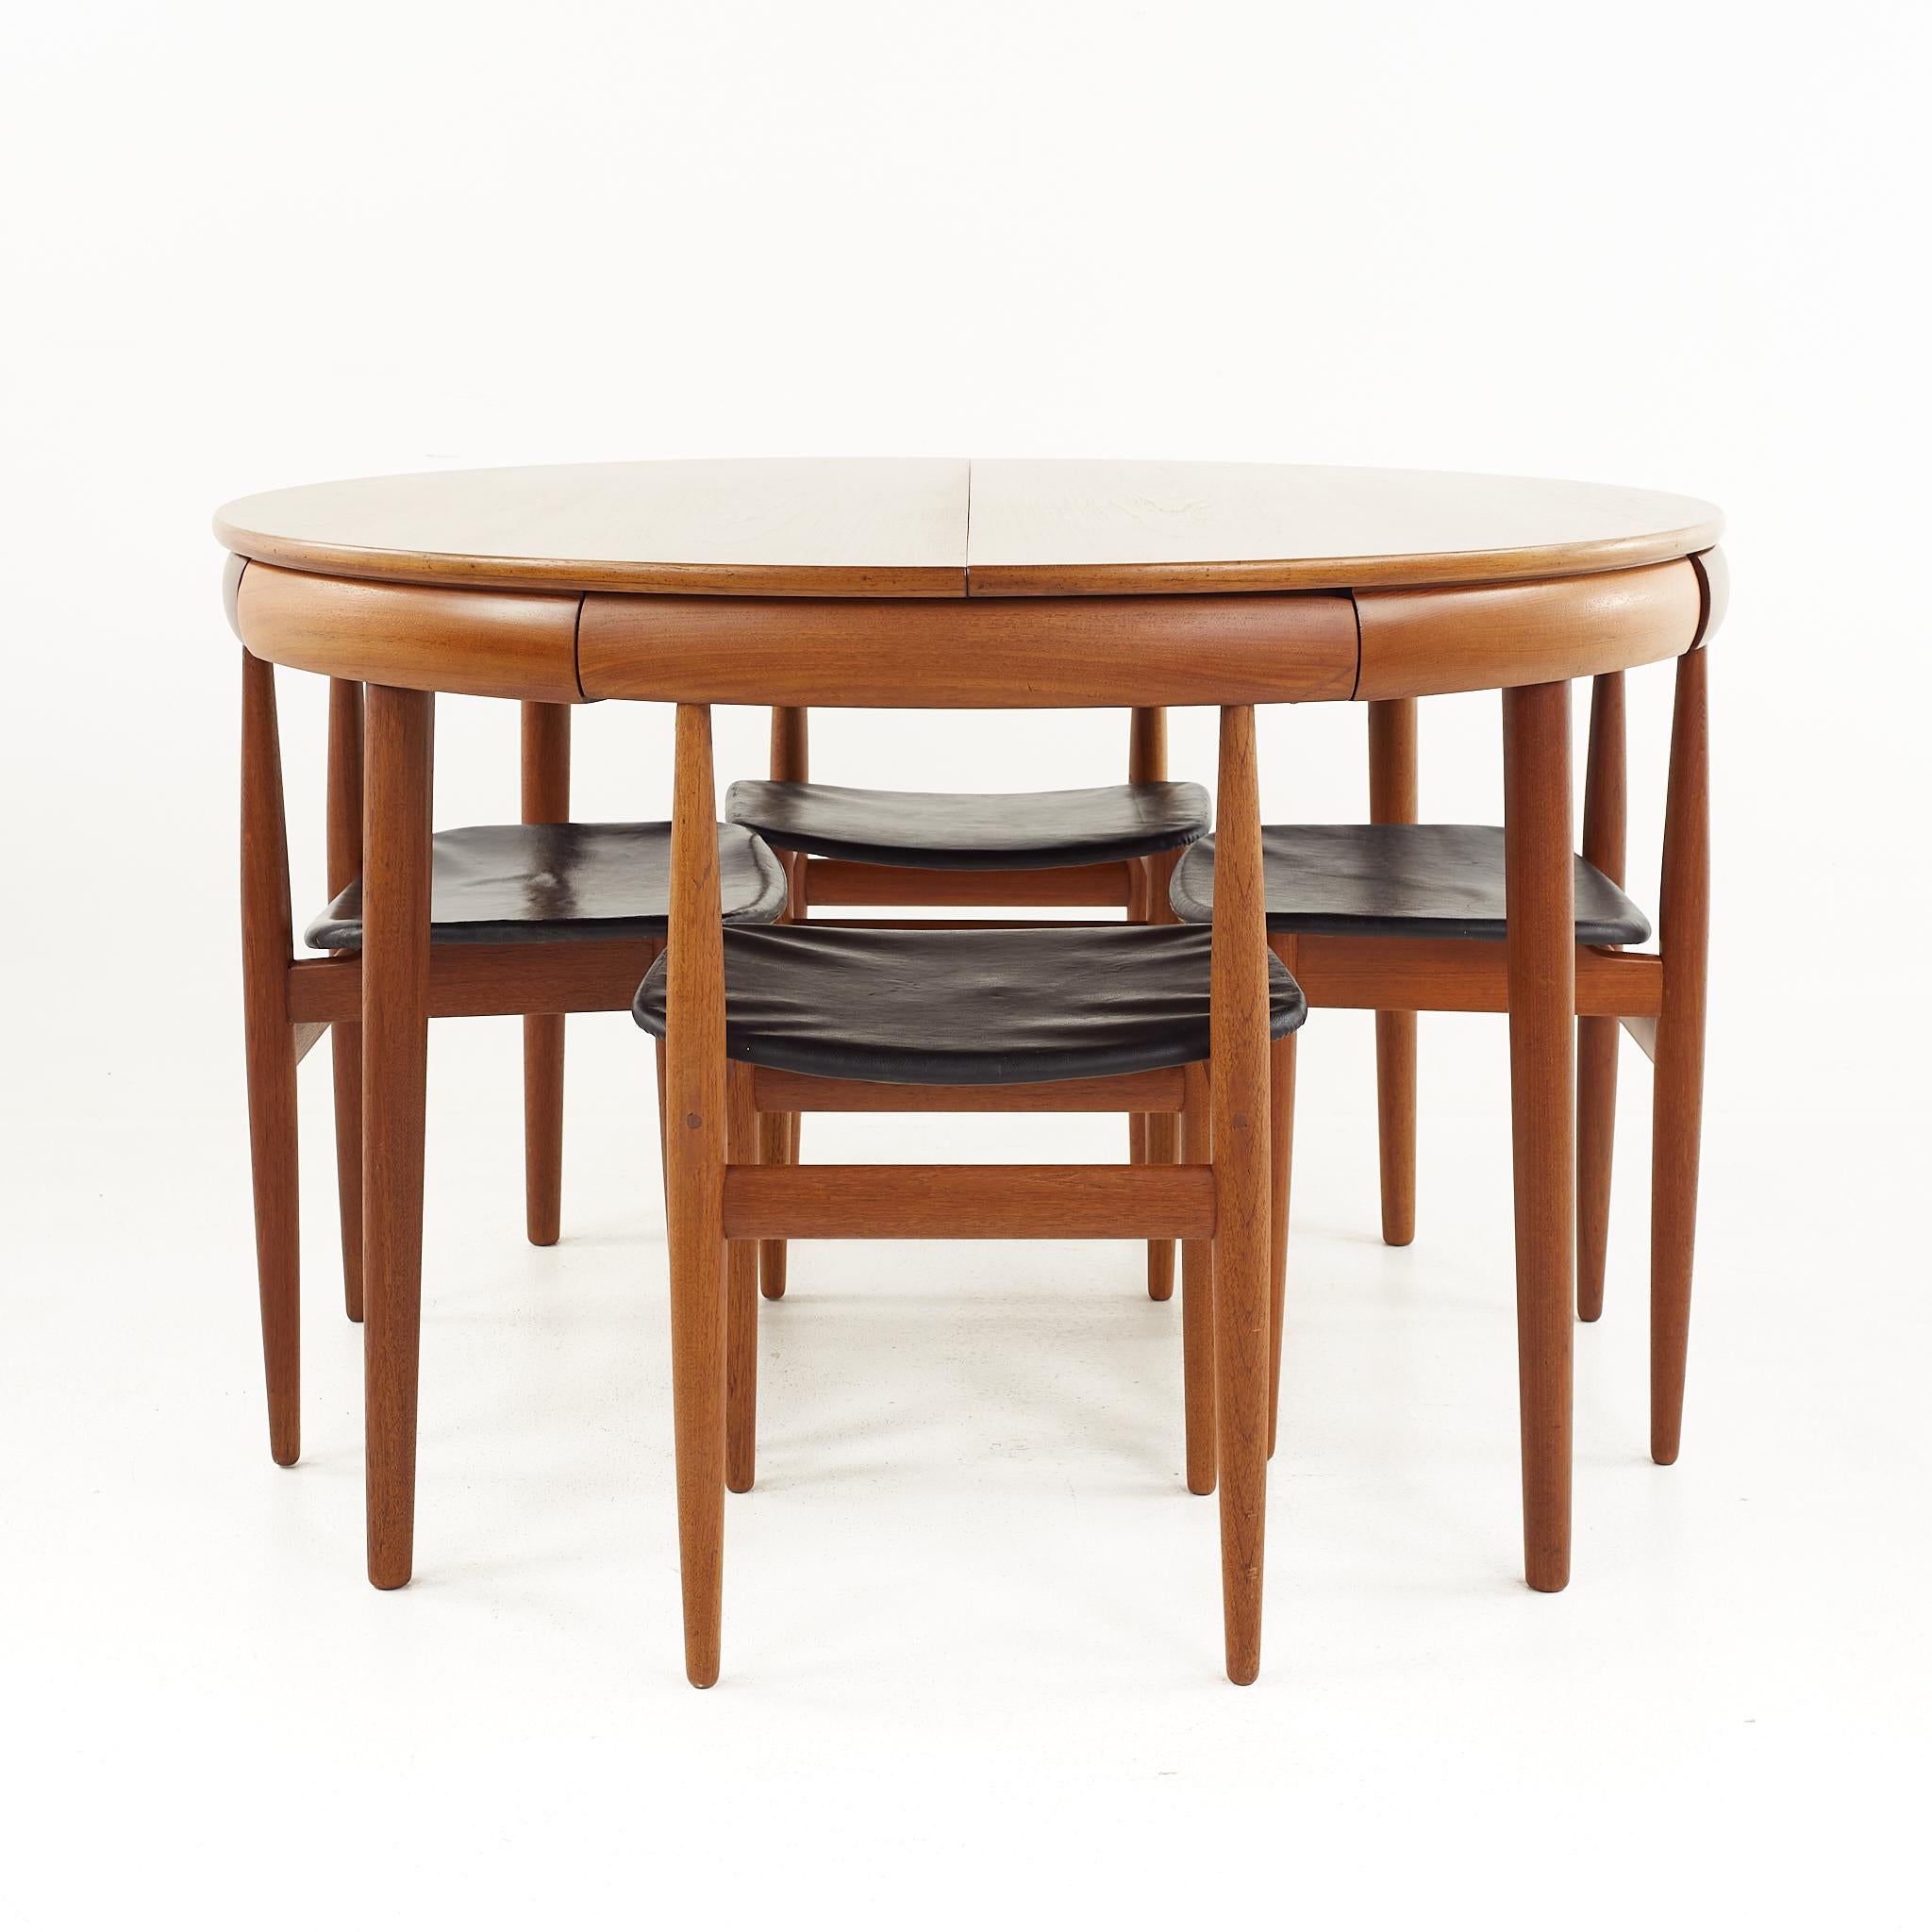 Frem Rojle mid-century teak hidden leaf dining table with 6 nesting chairs

This table measures: 47 wide x 47 deep x 29.25 inches high, with a chair clearance of 26.25 inches

(Chair measurements are pending)

All pieces of furniture can be